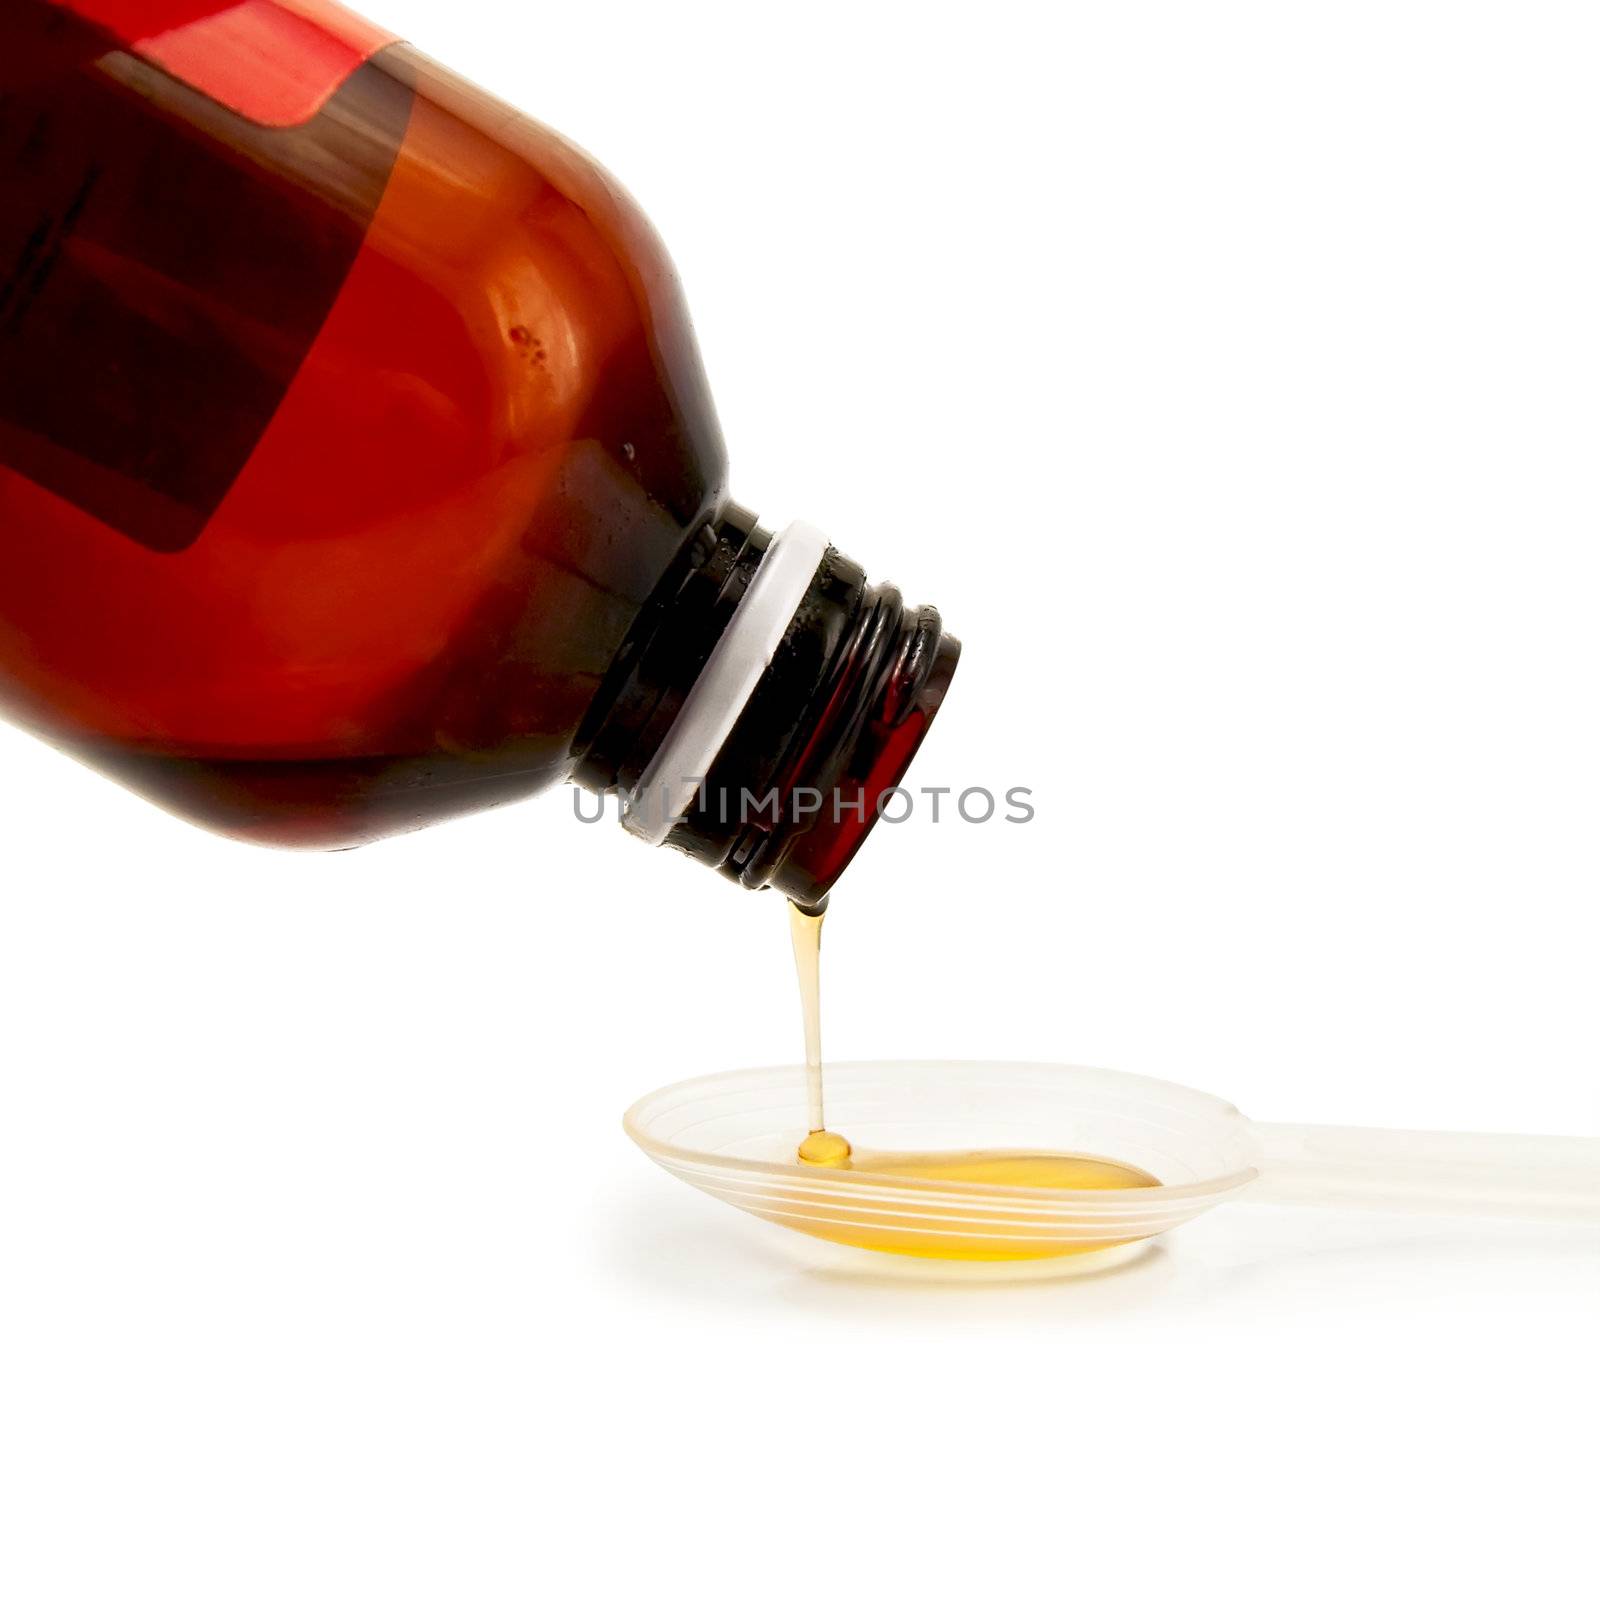 Yellow syrup poured from a brown bottle in a plastic spoon isolated on white background